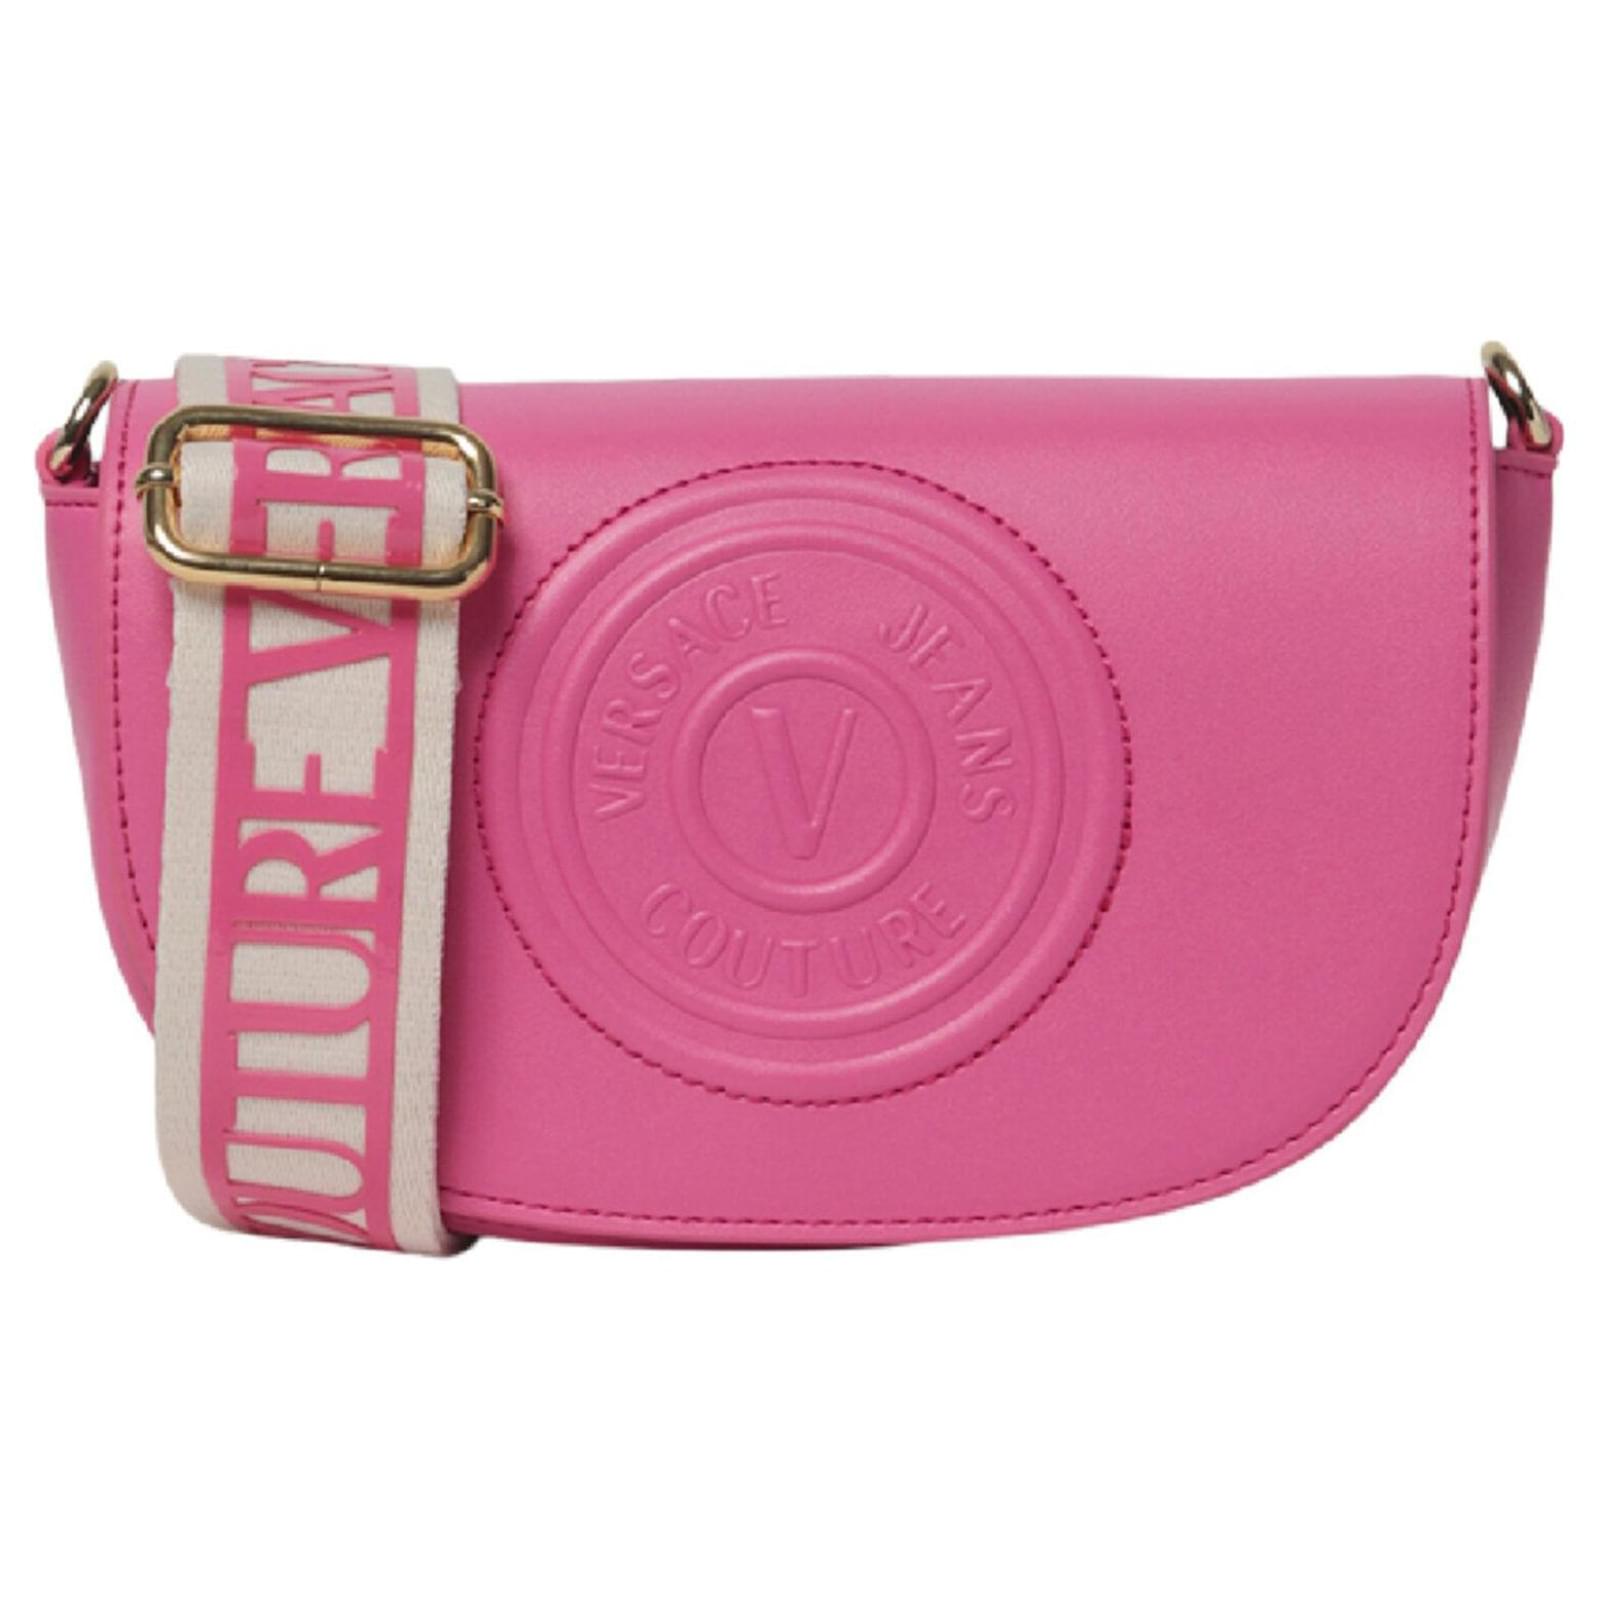 Versace Jeans Couture, Front Logo Cross Body Bag